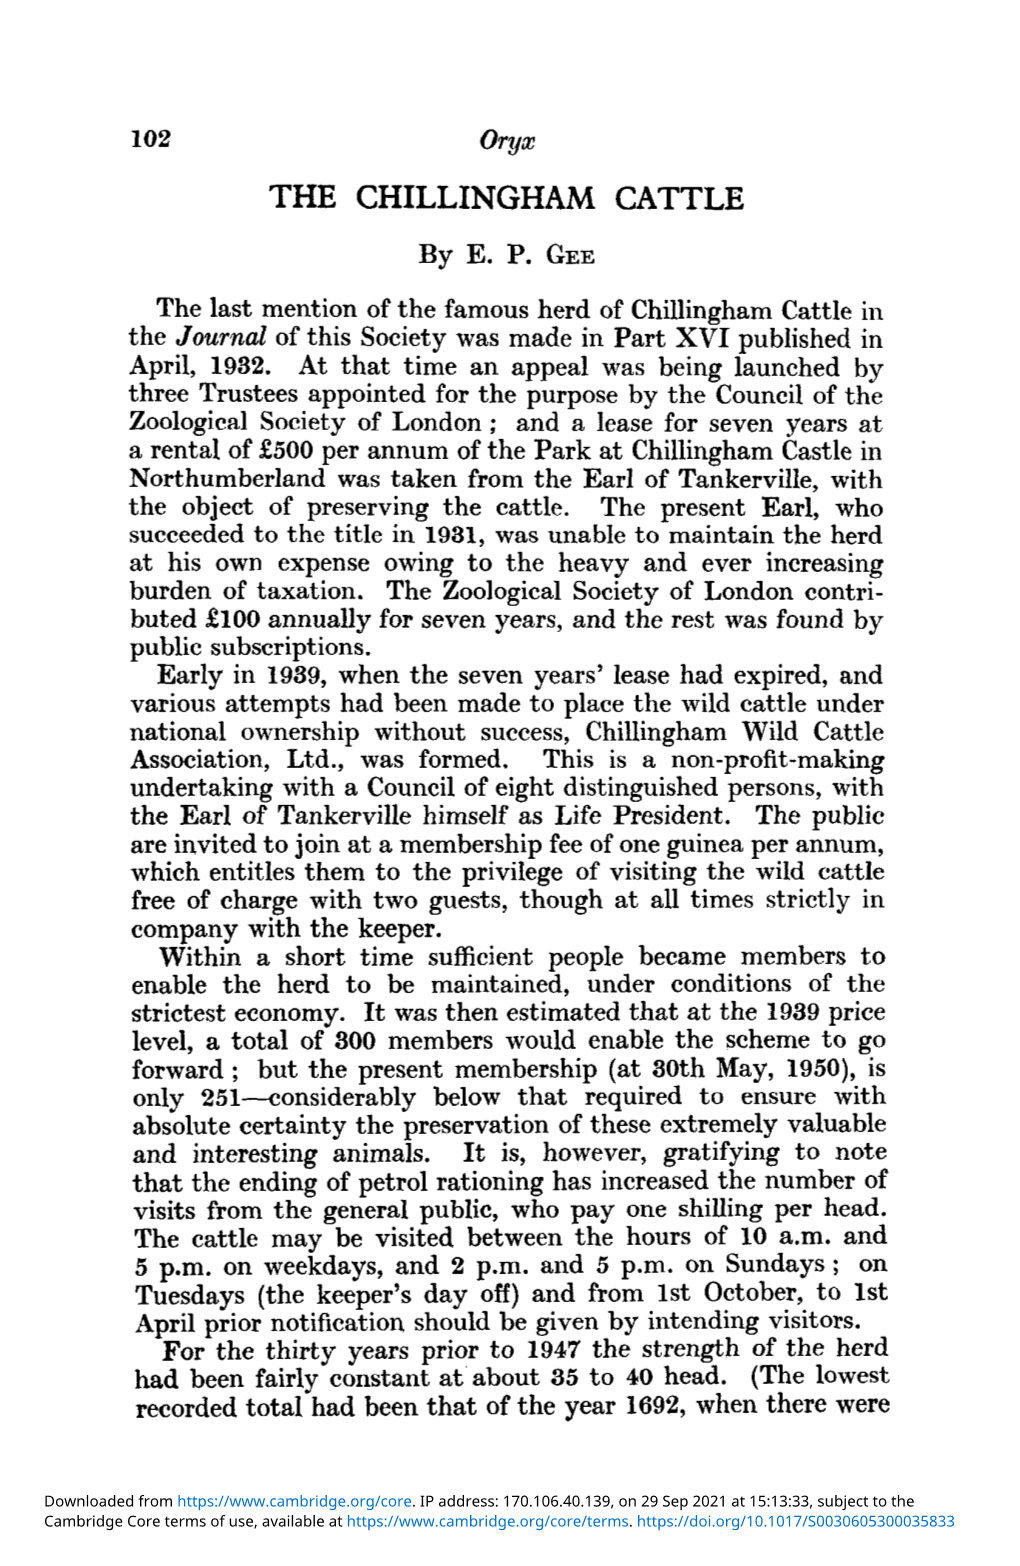 THE CHILLINGHAM CATTLE by E